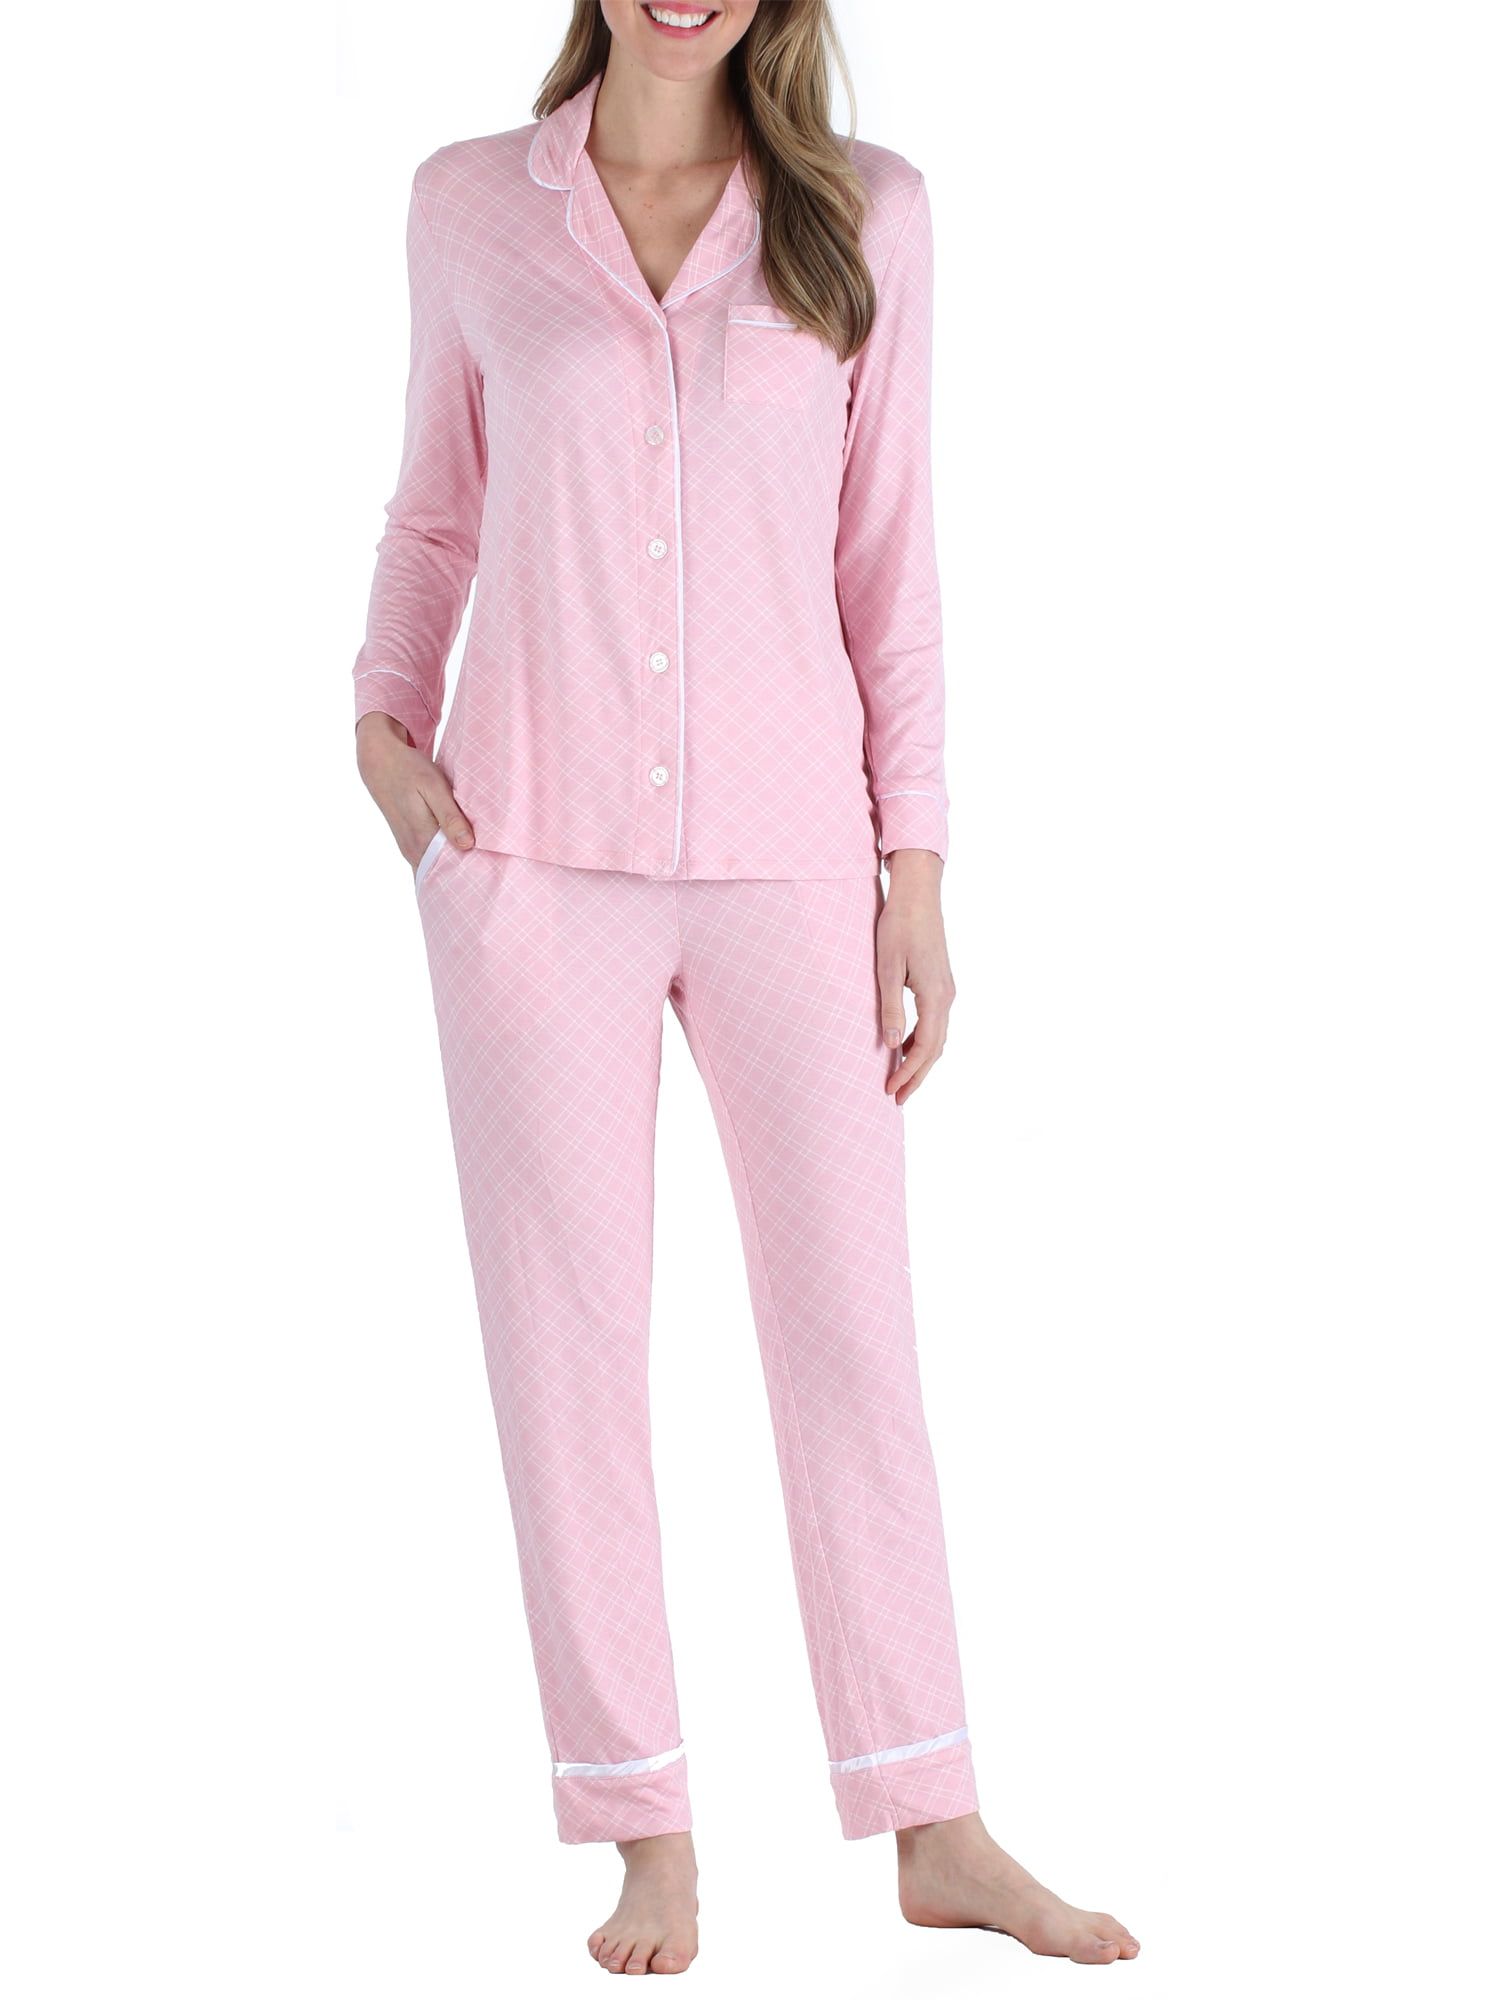 Bsoft Bsoft Women S Breathable Soft 2 Piece Long Sleeve Button Down Pajama Lounger Set